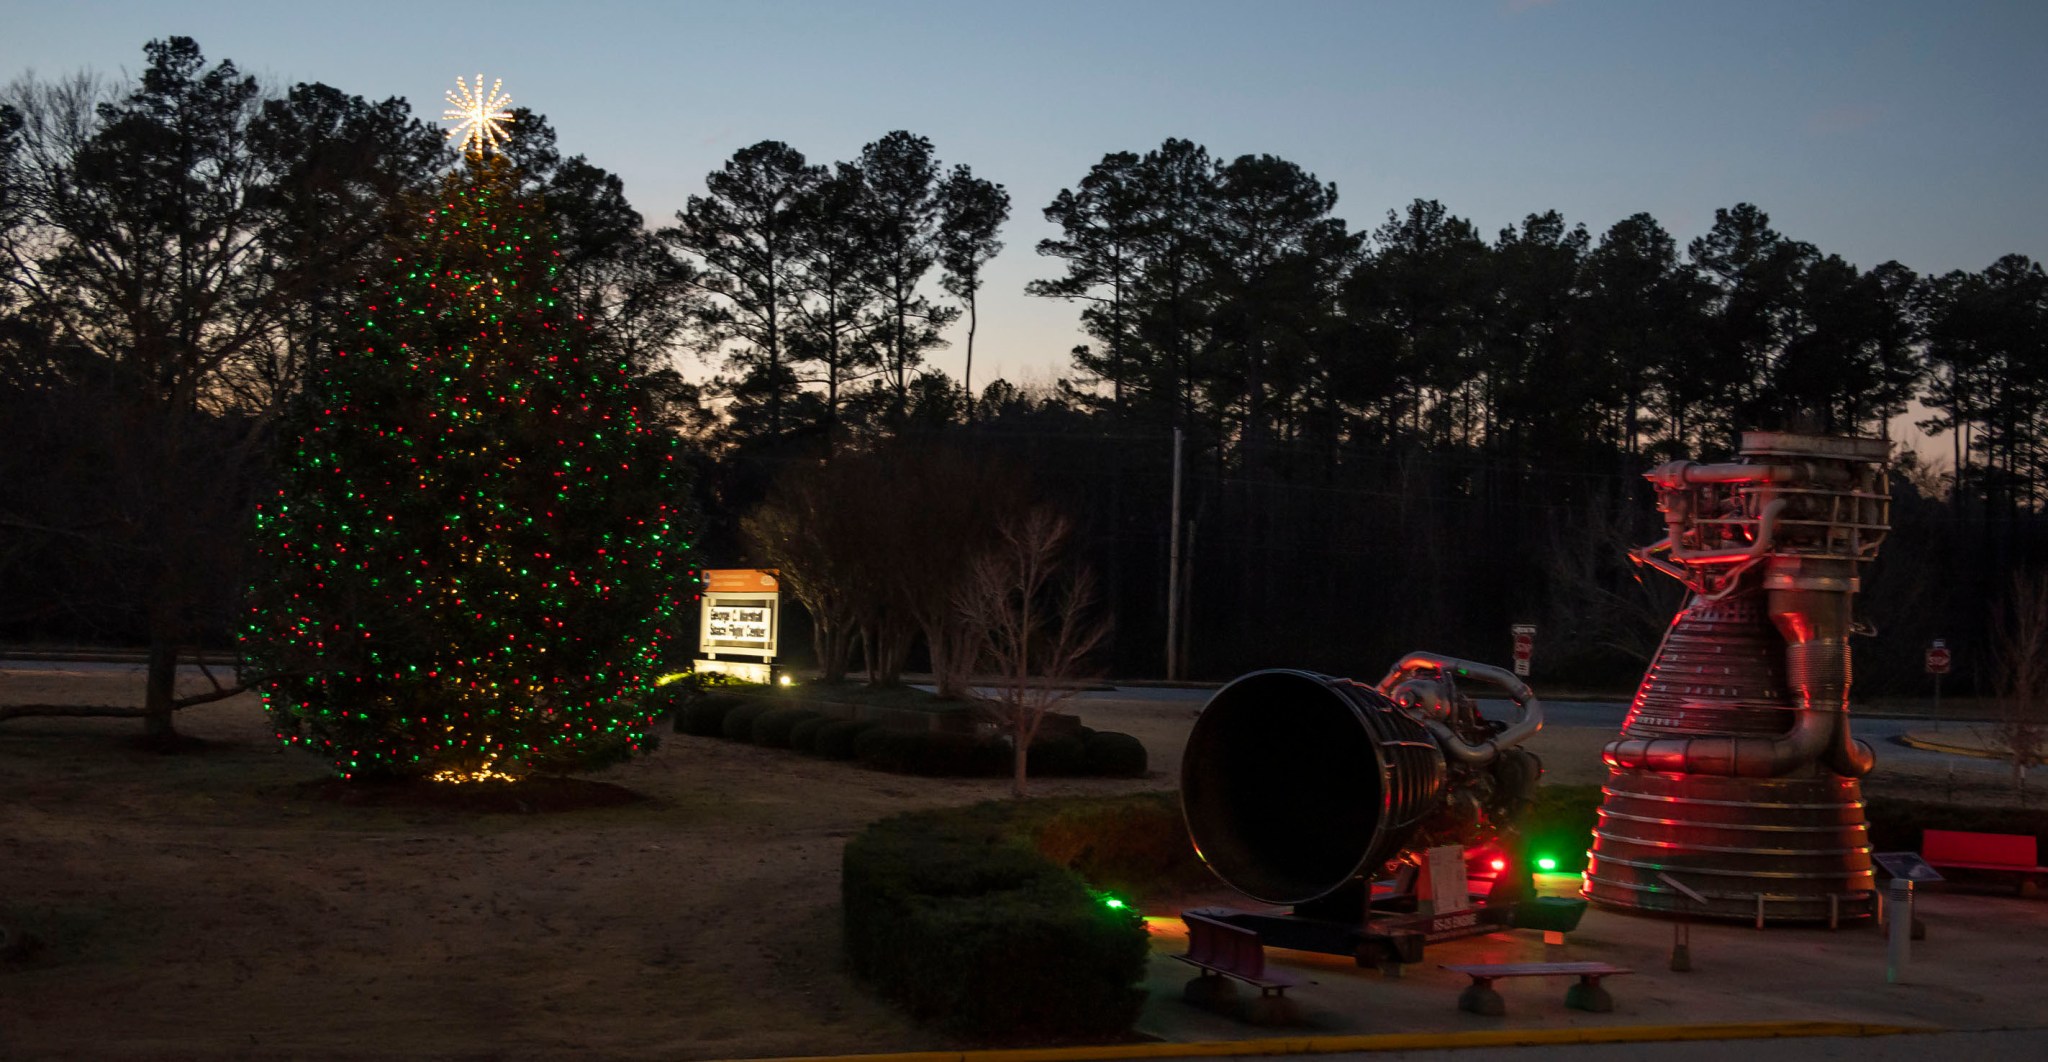 NASA Marshall Space Flight Center's holiday tree was officially lit Dec. 3.